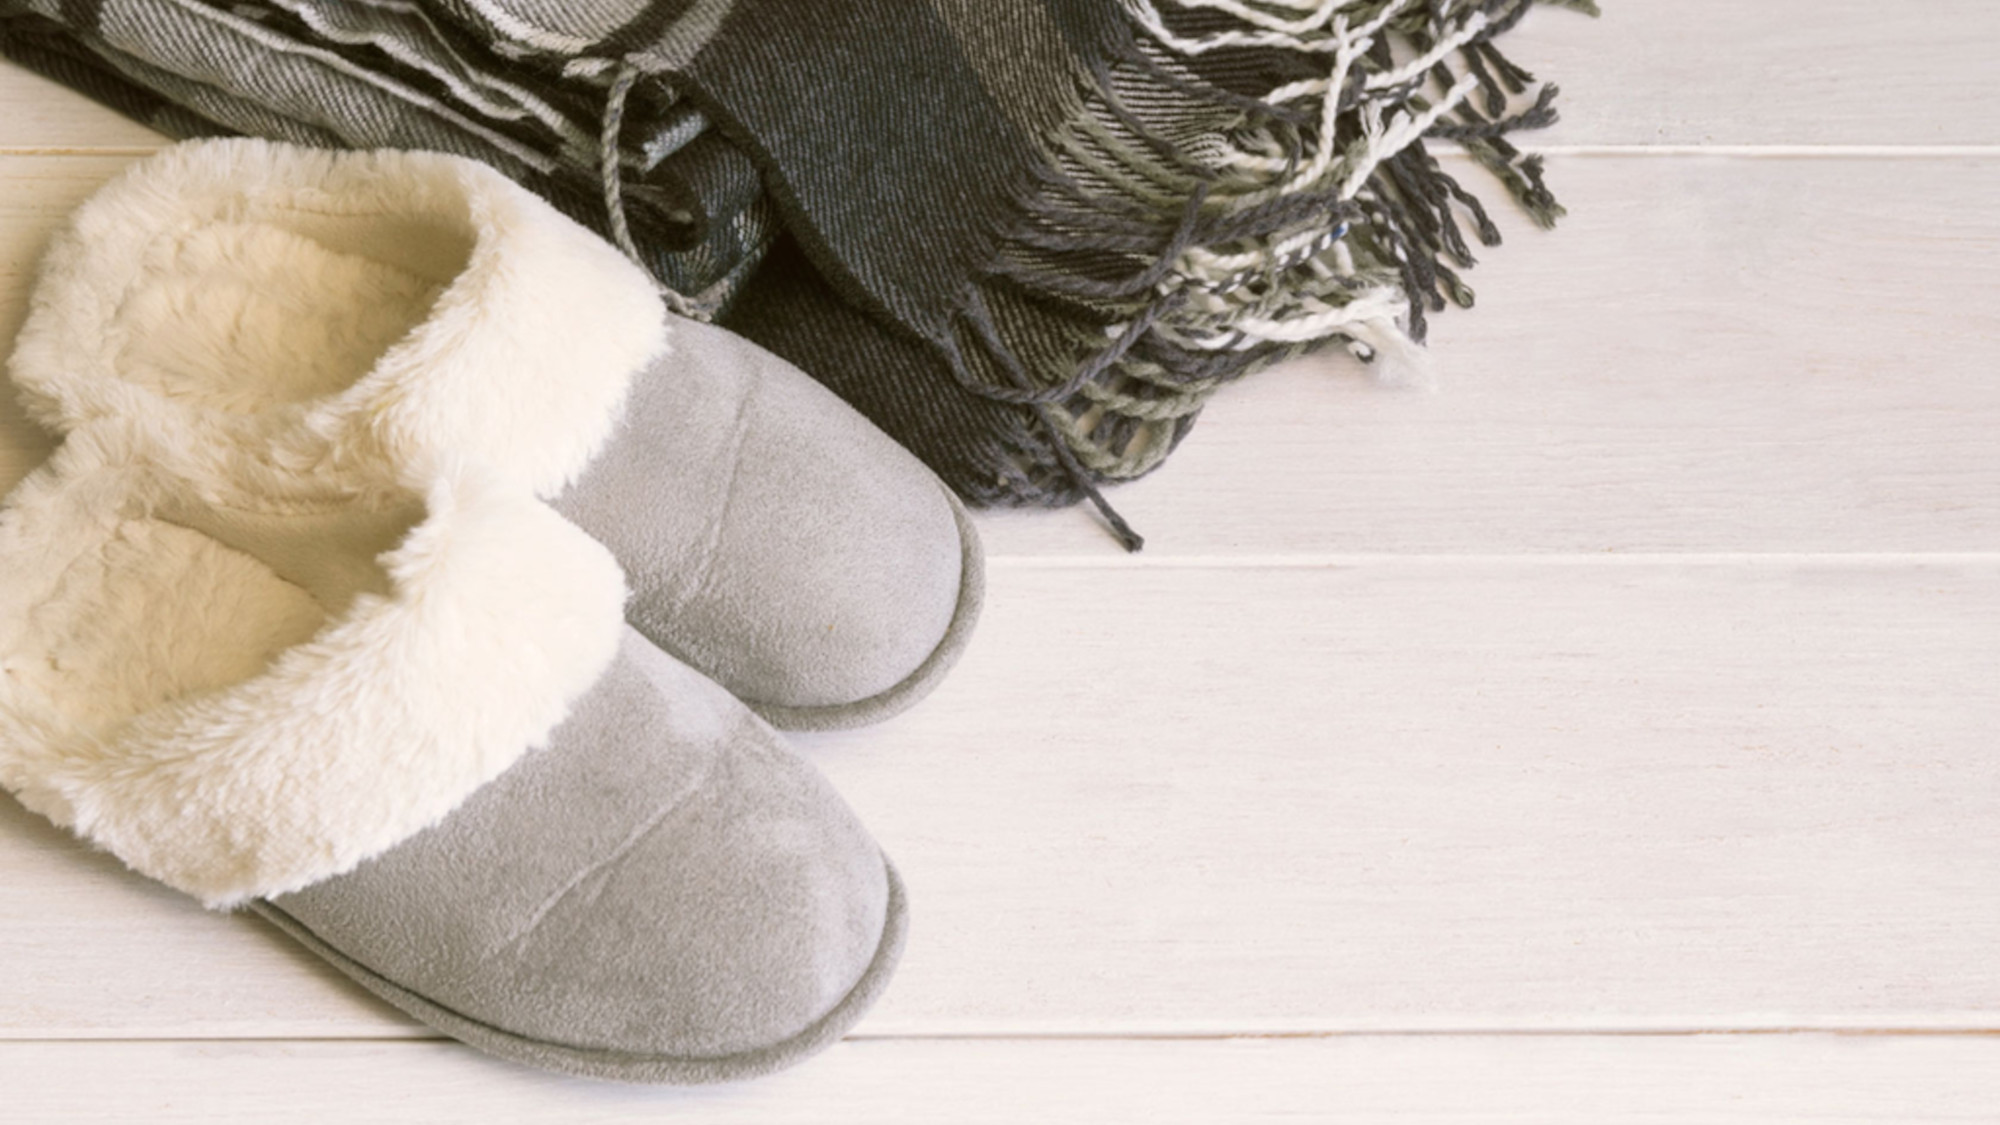 Gray cozy slippers with fur trim.